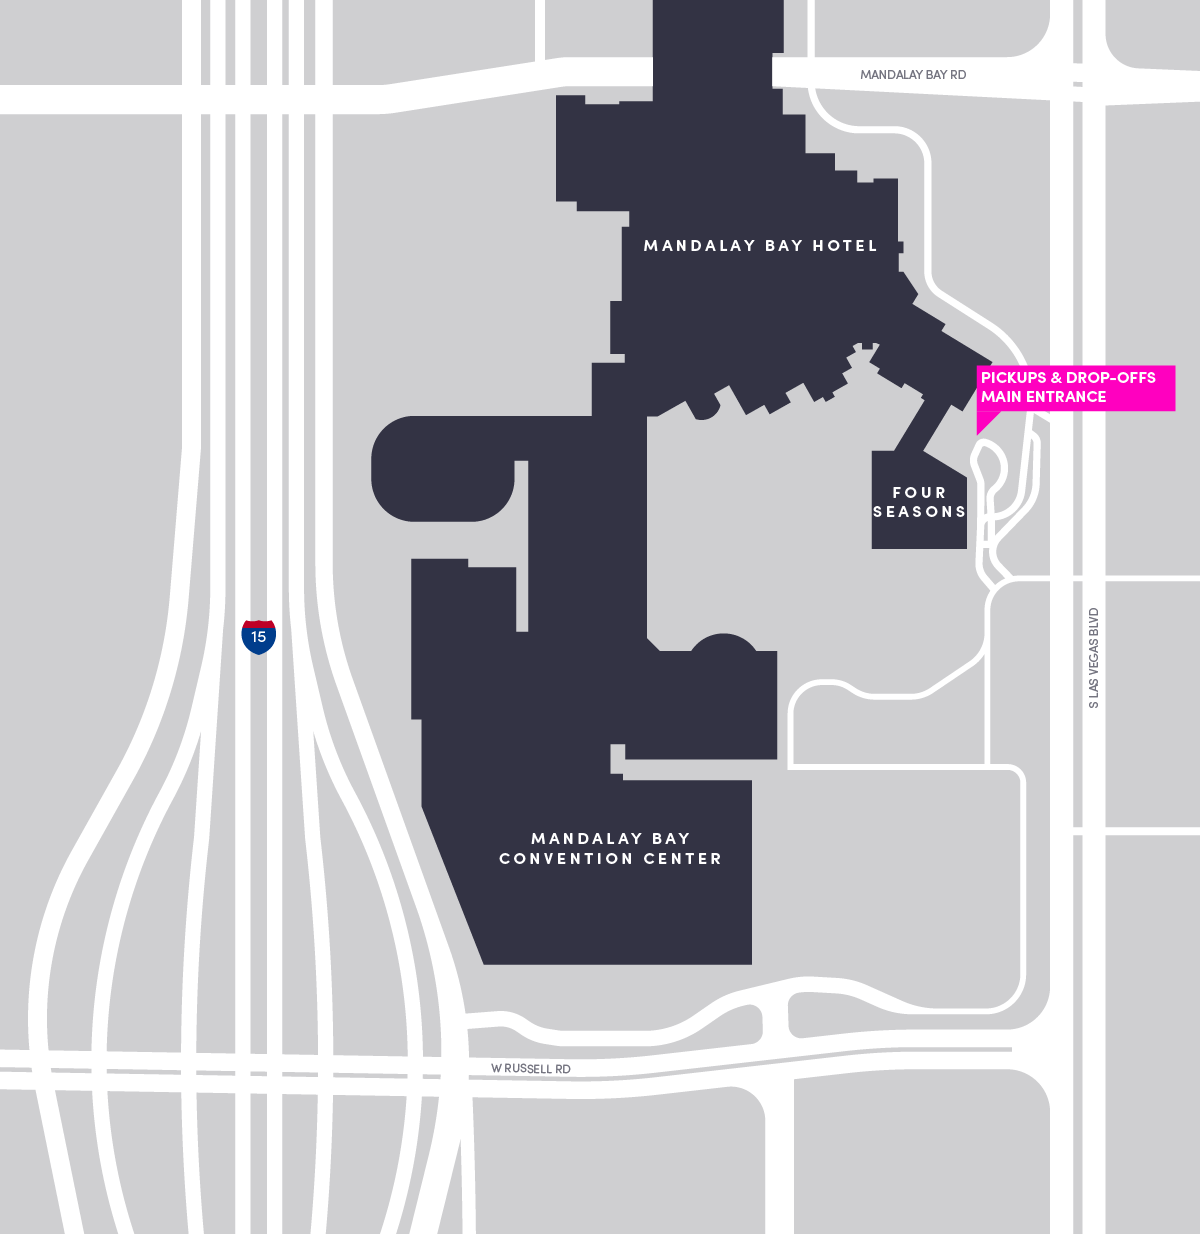 Map of the pickup and drop-off area at Mandalay Bay in Las Vegas.